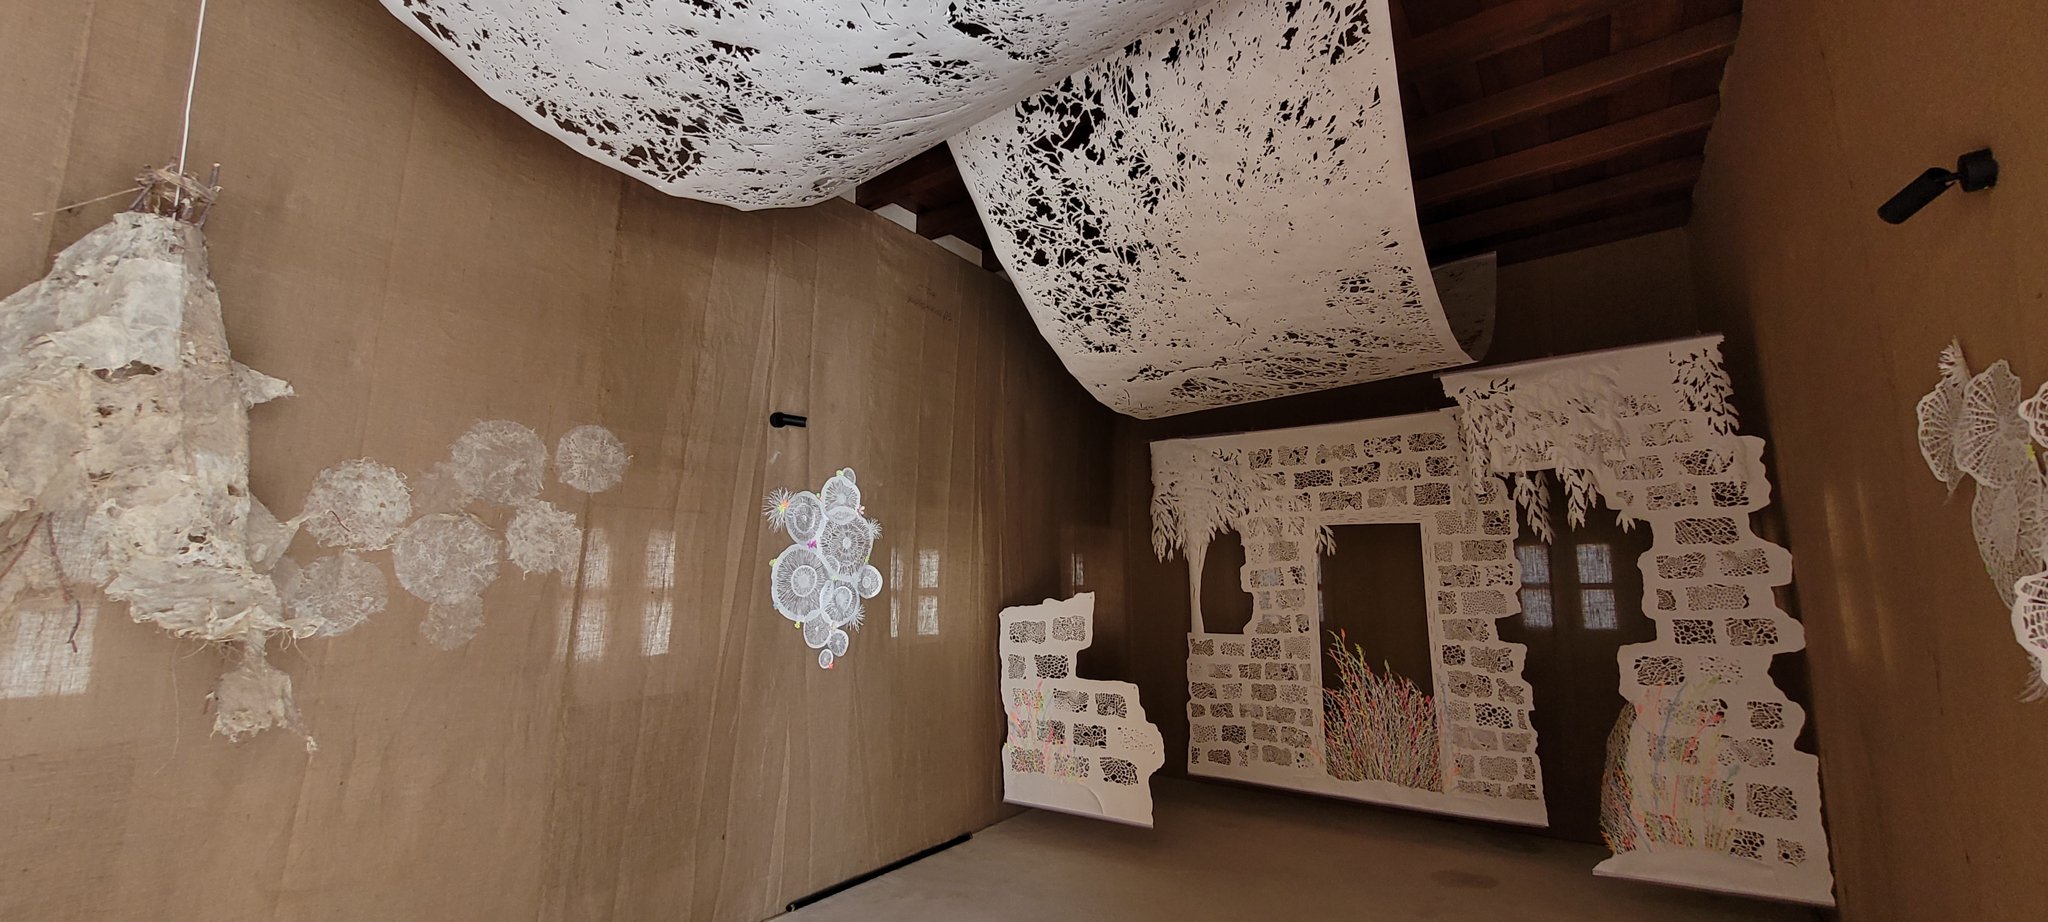  This is the work of the 2022 Artist in Residence at the Al Qasimi Foundation - Masarratfatima. This entire work was created in the office here and is made entirely of finely hand cut paper. Her patience is unbelievable, and the installation is stunn